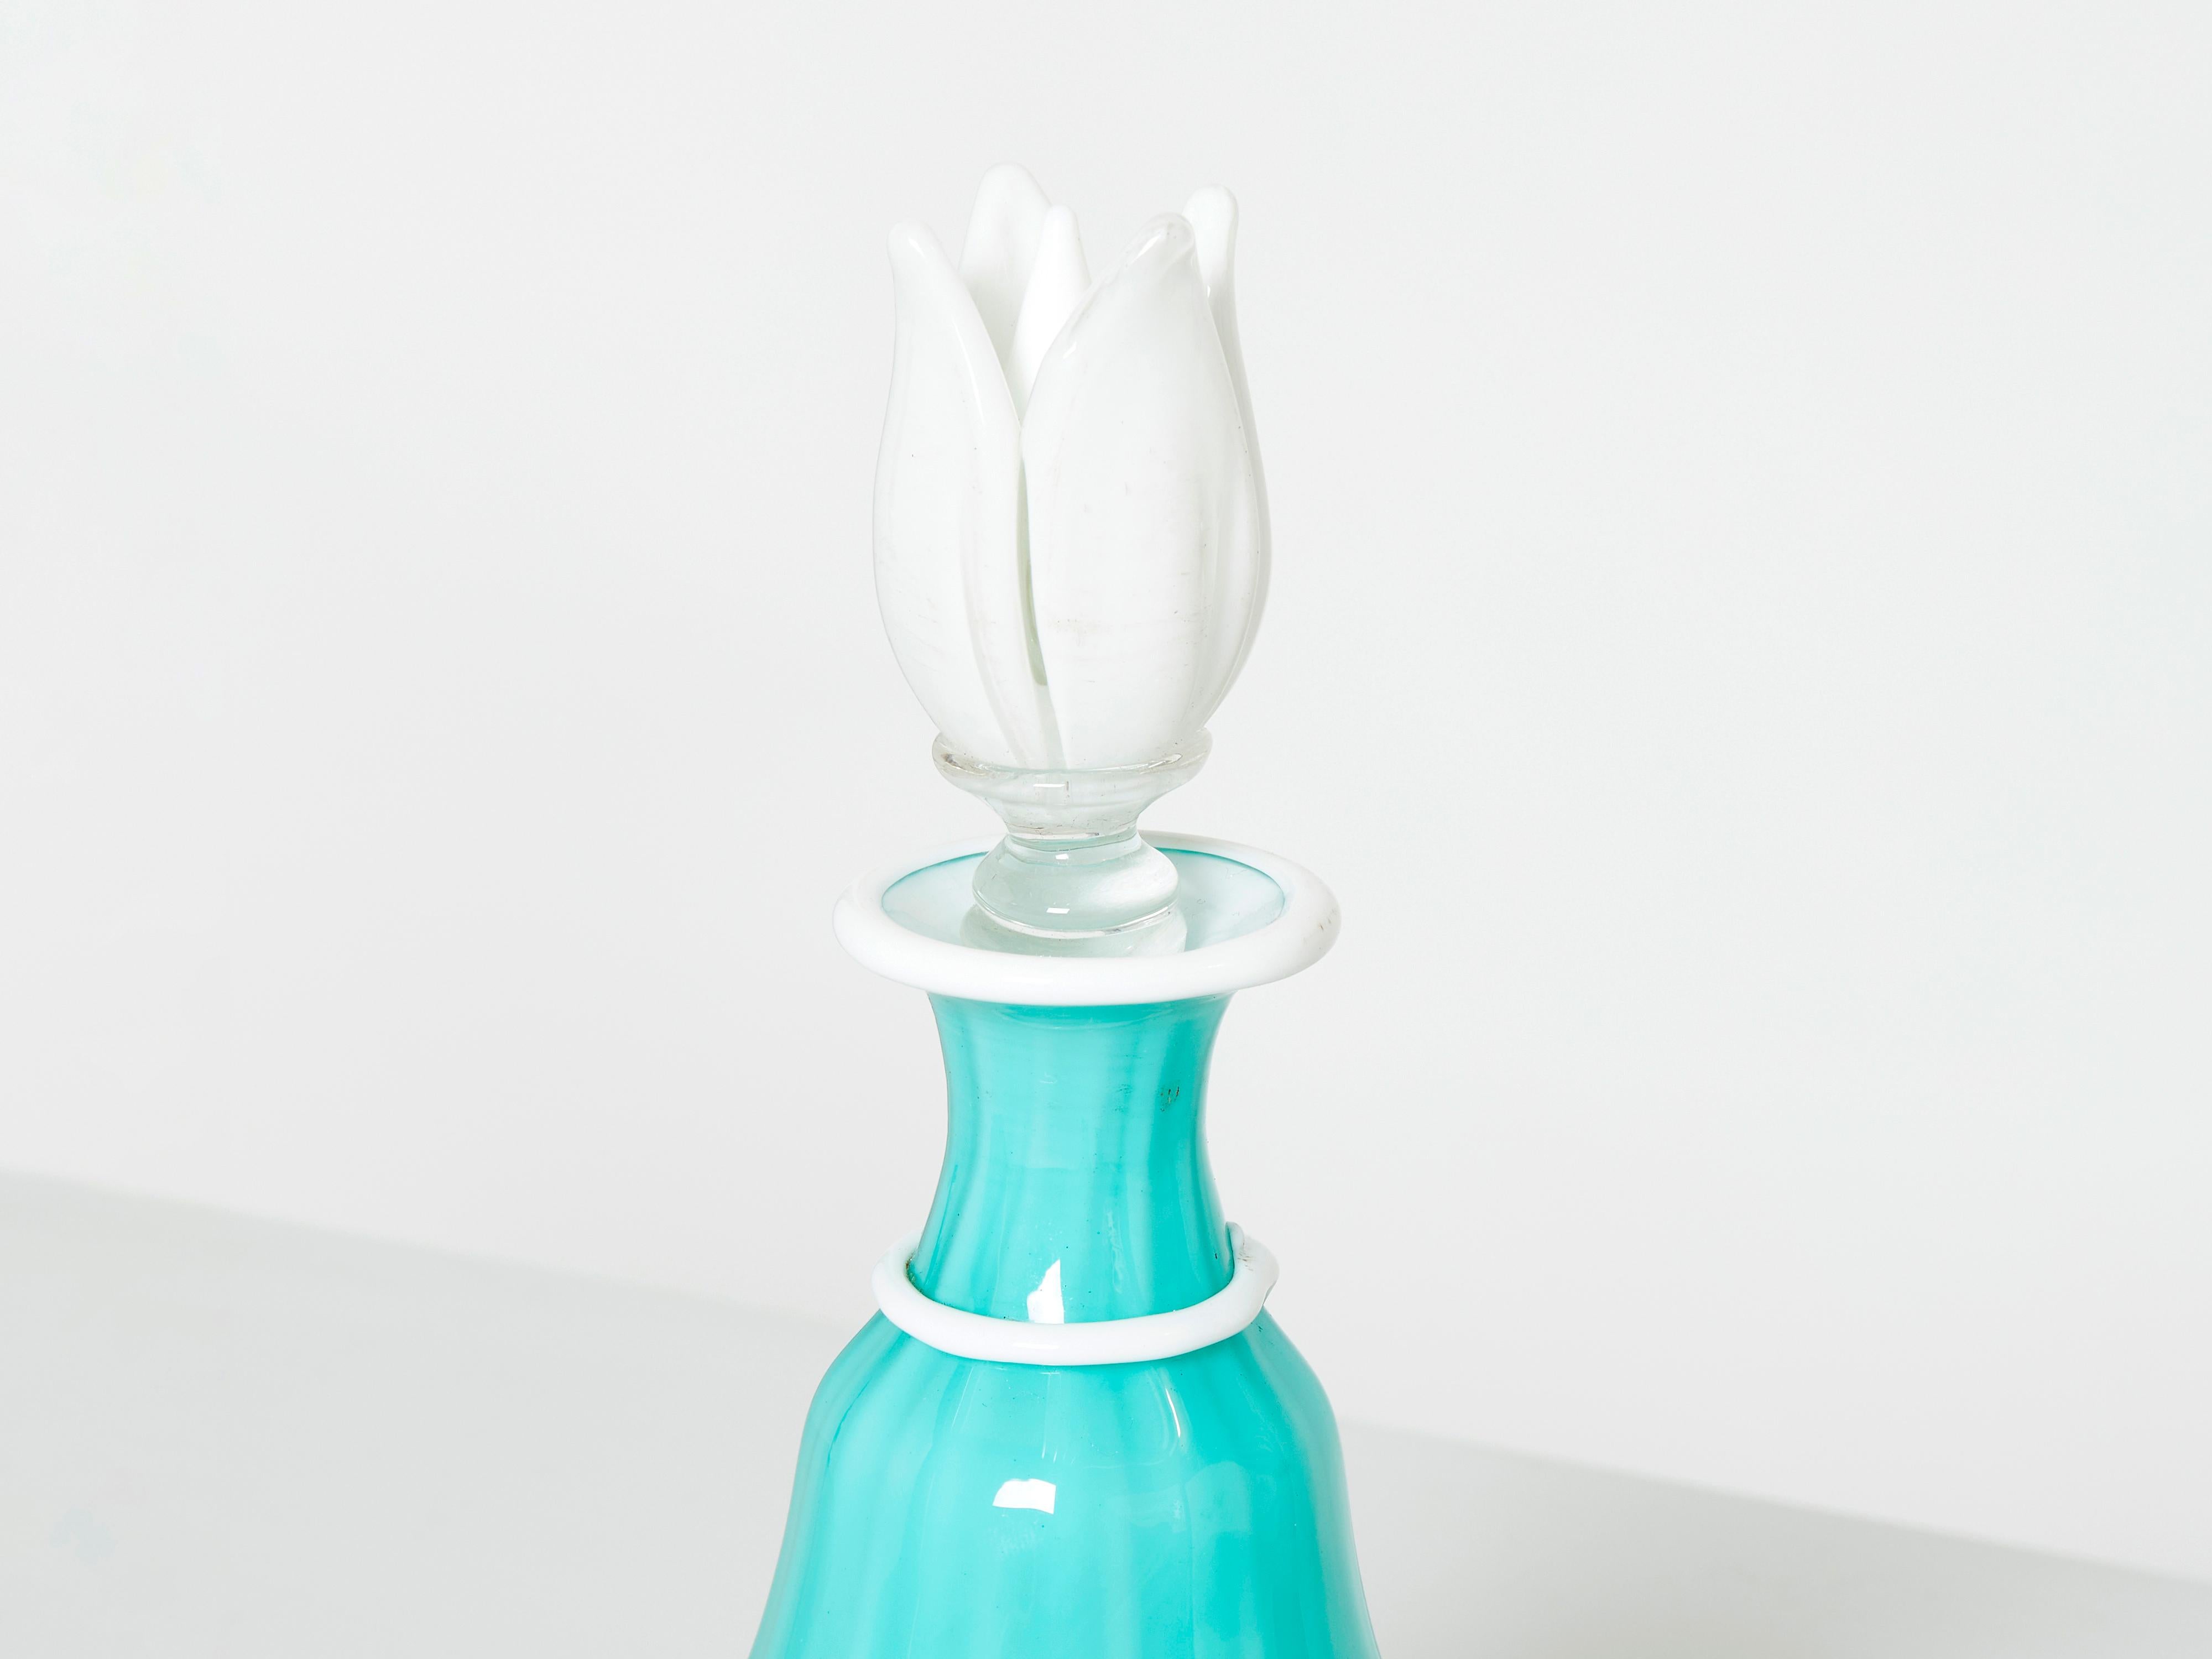 Rare Barovier & toso opal glass bottle designed in the 1950s. This beautiful flaconne Murano piece has a really eye-catching colour and presence, with turquoise opal glass with milky white opal glass base, details and beautiful stopper. Found in a